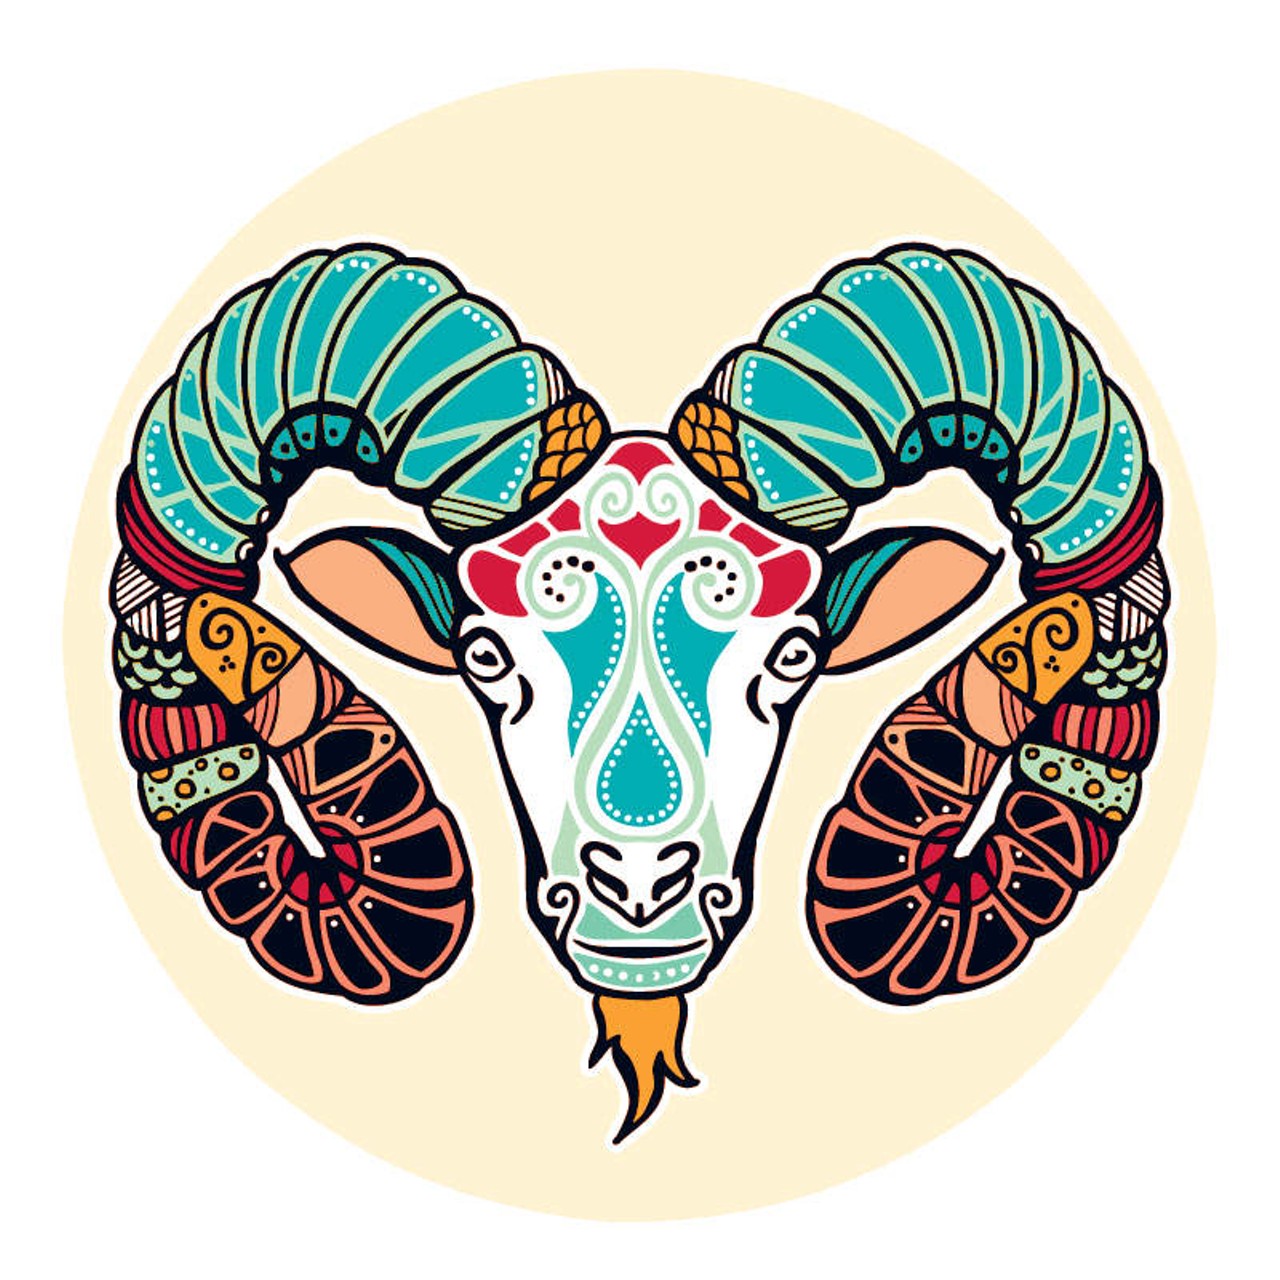 ARIES (March 21- April 20): 
In situations like this it&#146;s hard to separate truth from lies. When the gossip gets out of hand it&#146;s best to give everyone the benefit of the doubt and forget about it. You have nothing to gain by feeding into the need to root out whoever&#146;s at fault, and it will take a while before you detach enough to just chalk it up to experience. Avoid anyone who insists on dredging up the past and keep reminding yourself that the old story not only no longer applies, it is no longer of any interest to you. For now letting things be will open the space for a whole new chapter to begin.